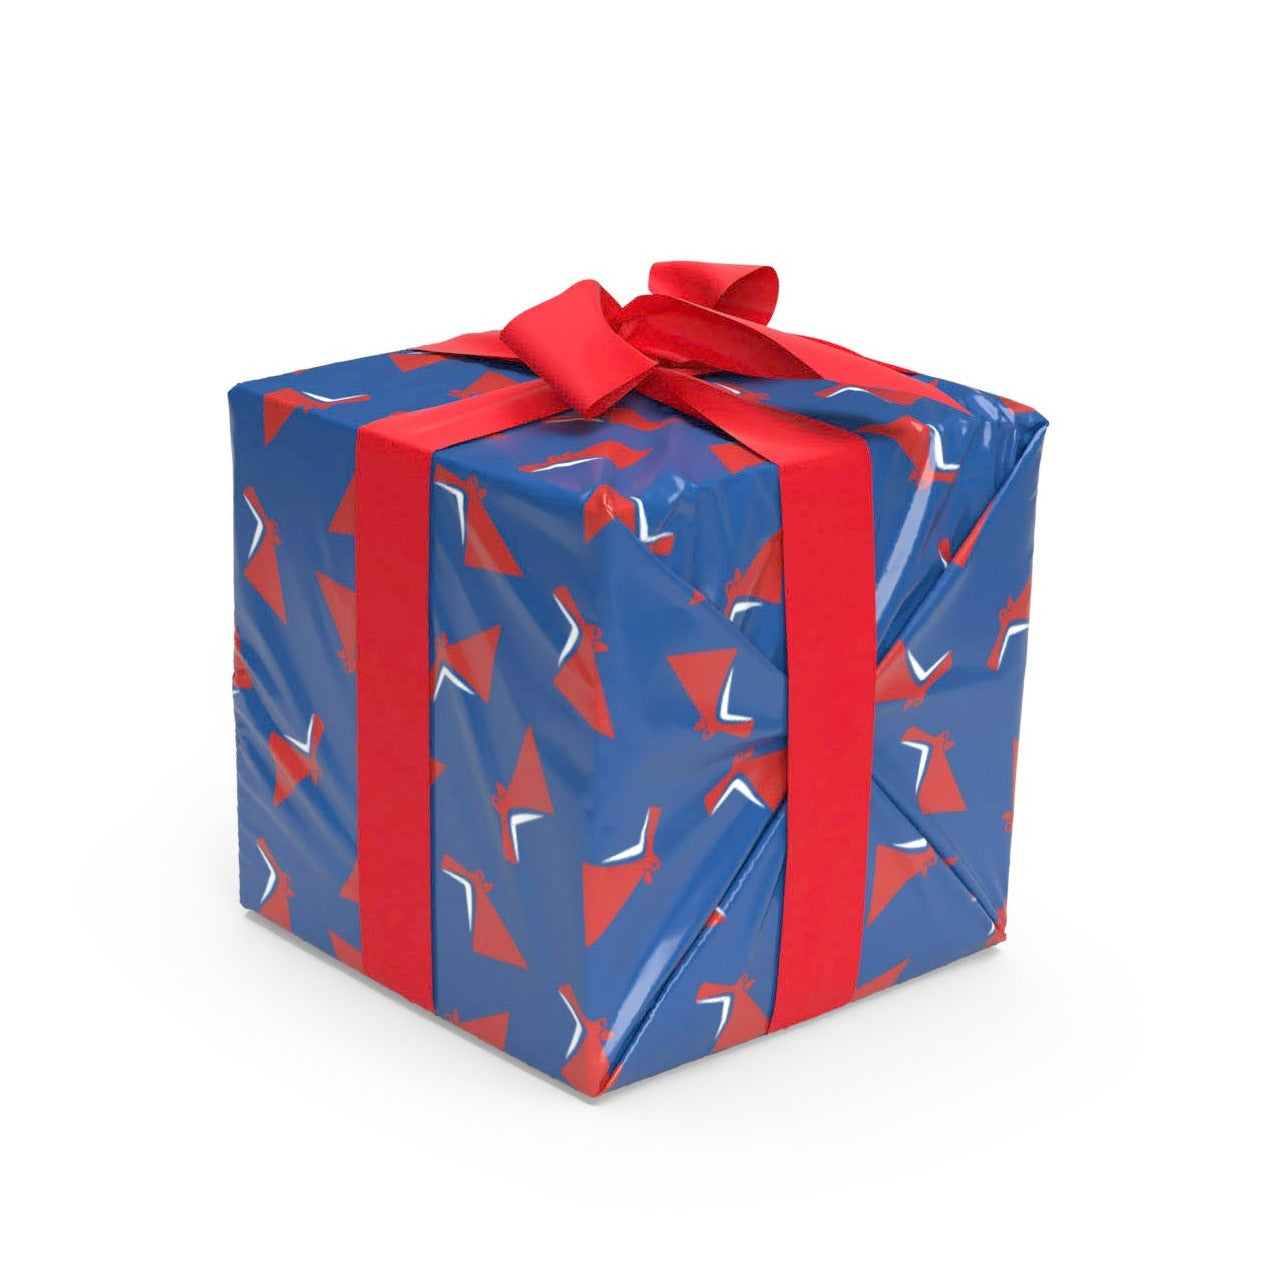 Carnival Wrapping Paper – Carnival Cruise Line